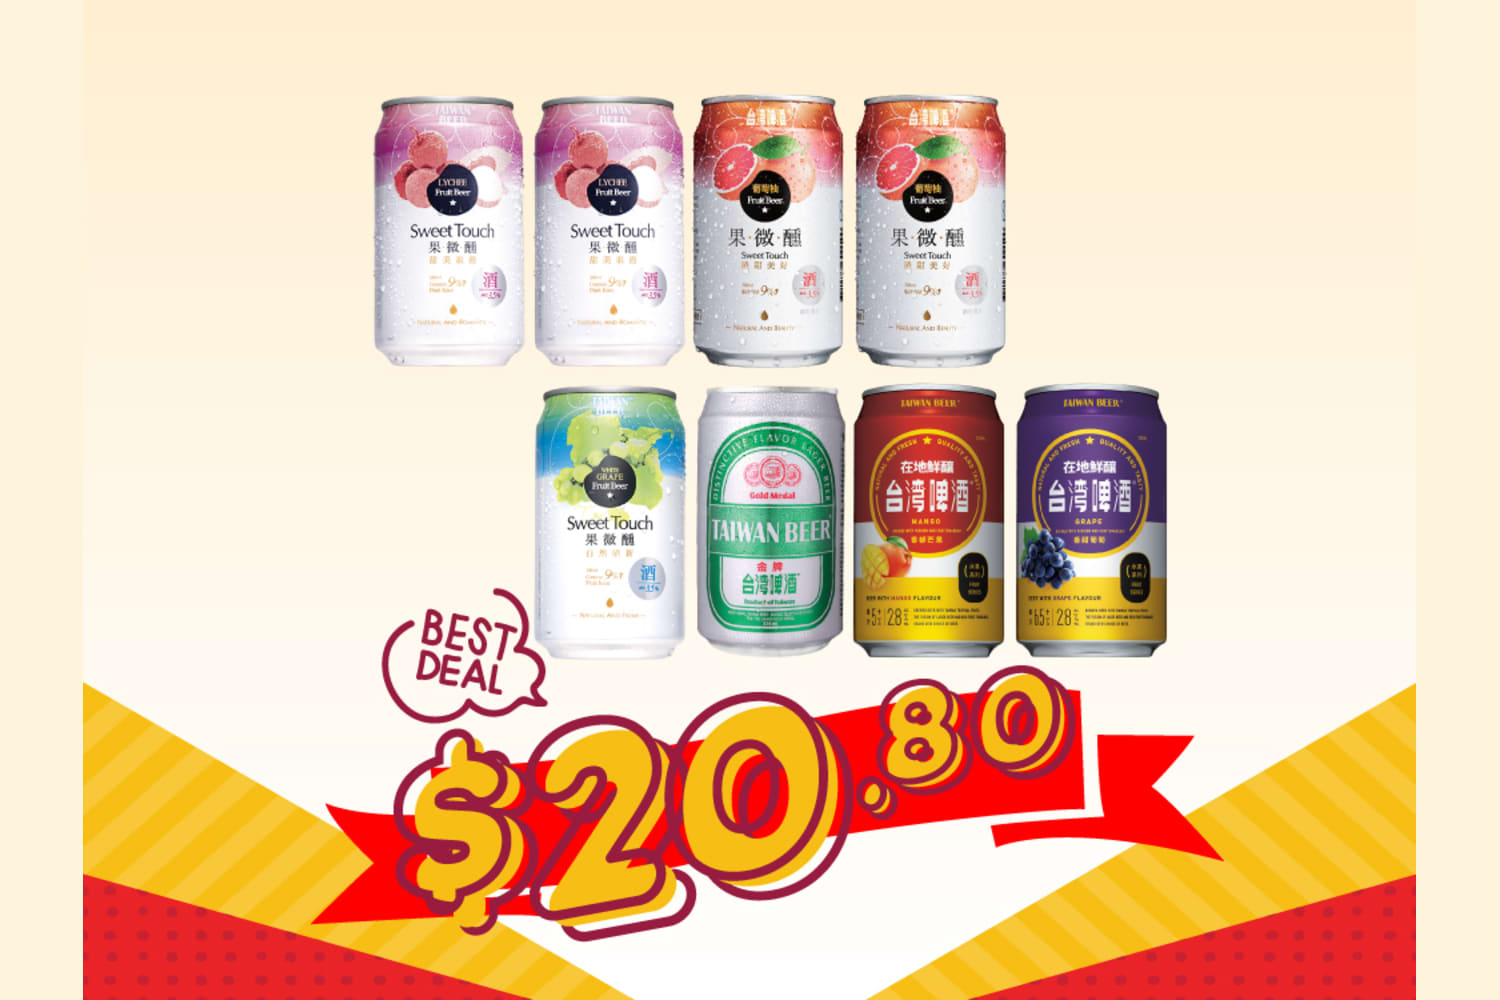 8 x Assorted Taiwan Beer [Limited Stock]